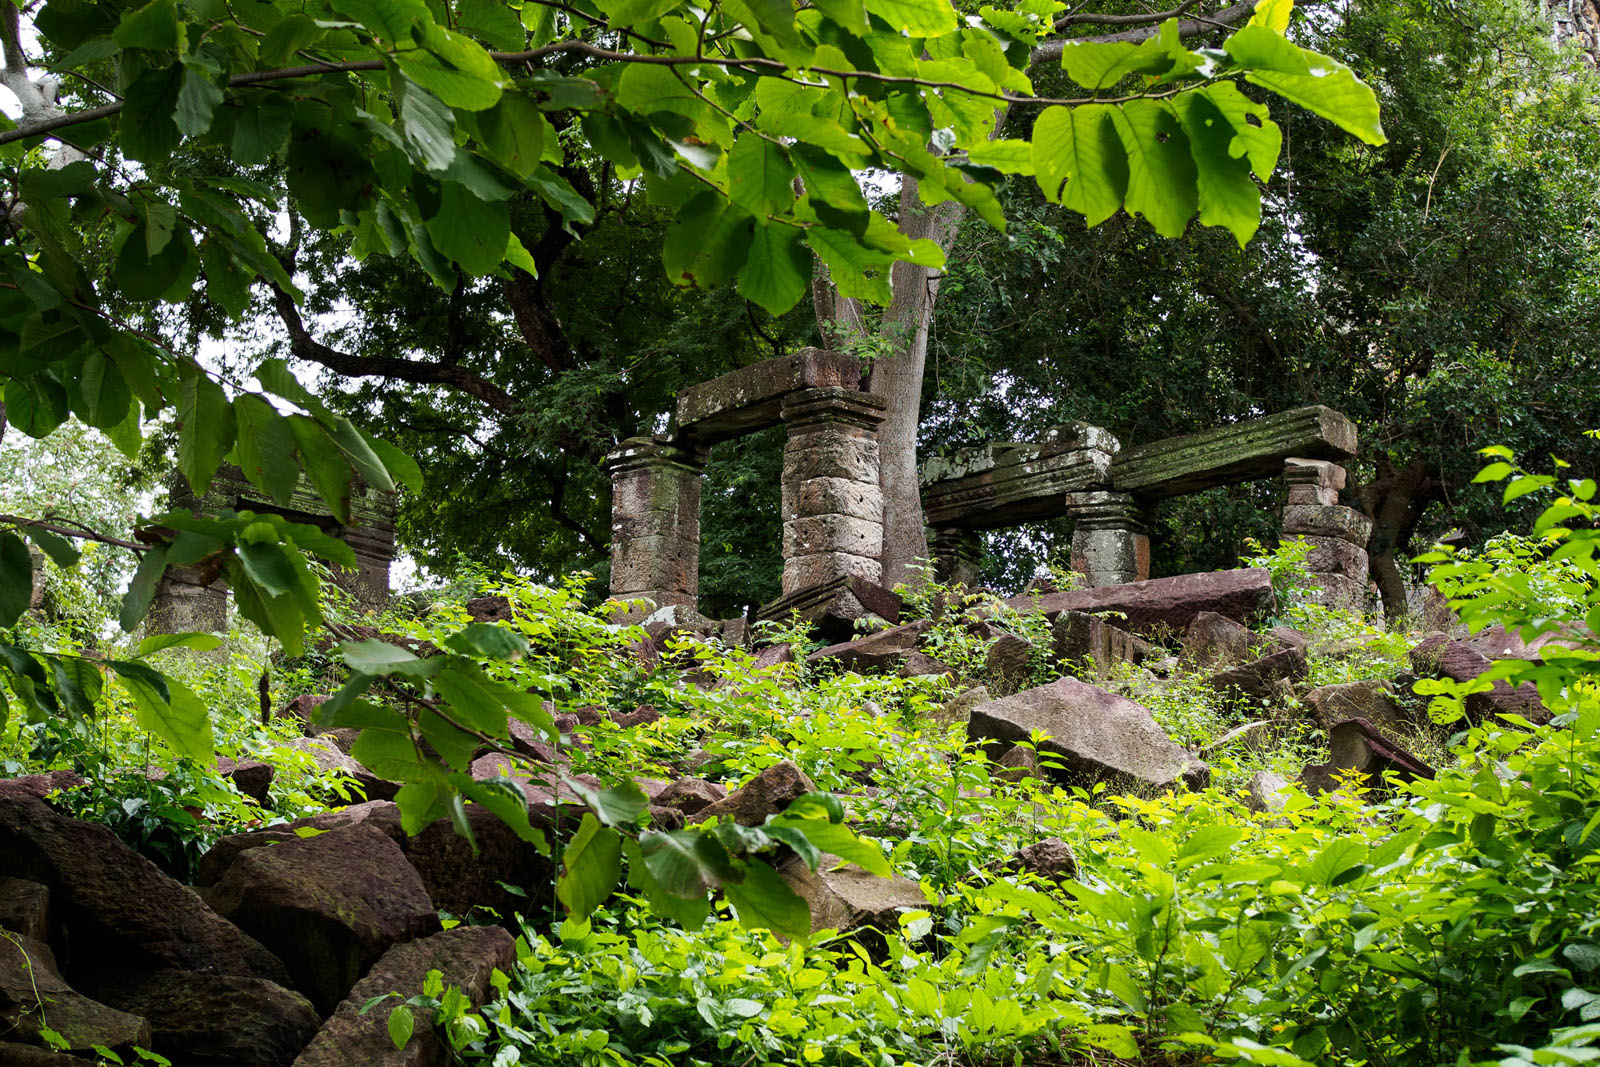 Many of the temple ruins at Banteay Chhmar are overgrown. This only adds to their allure. Photo by Emily Lush